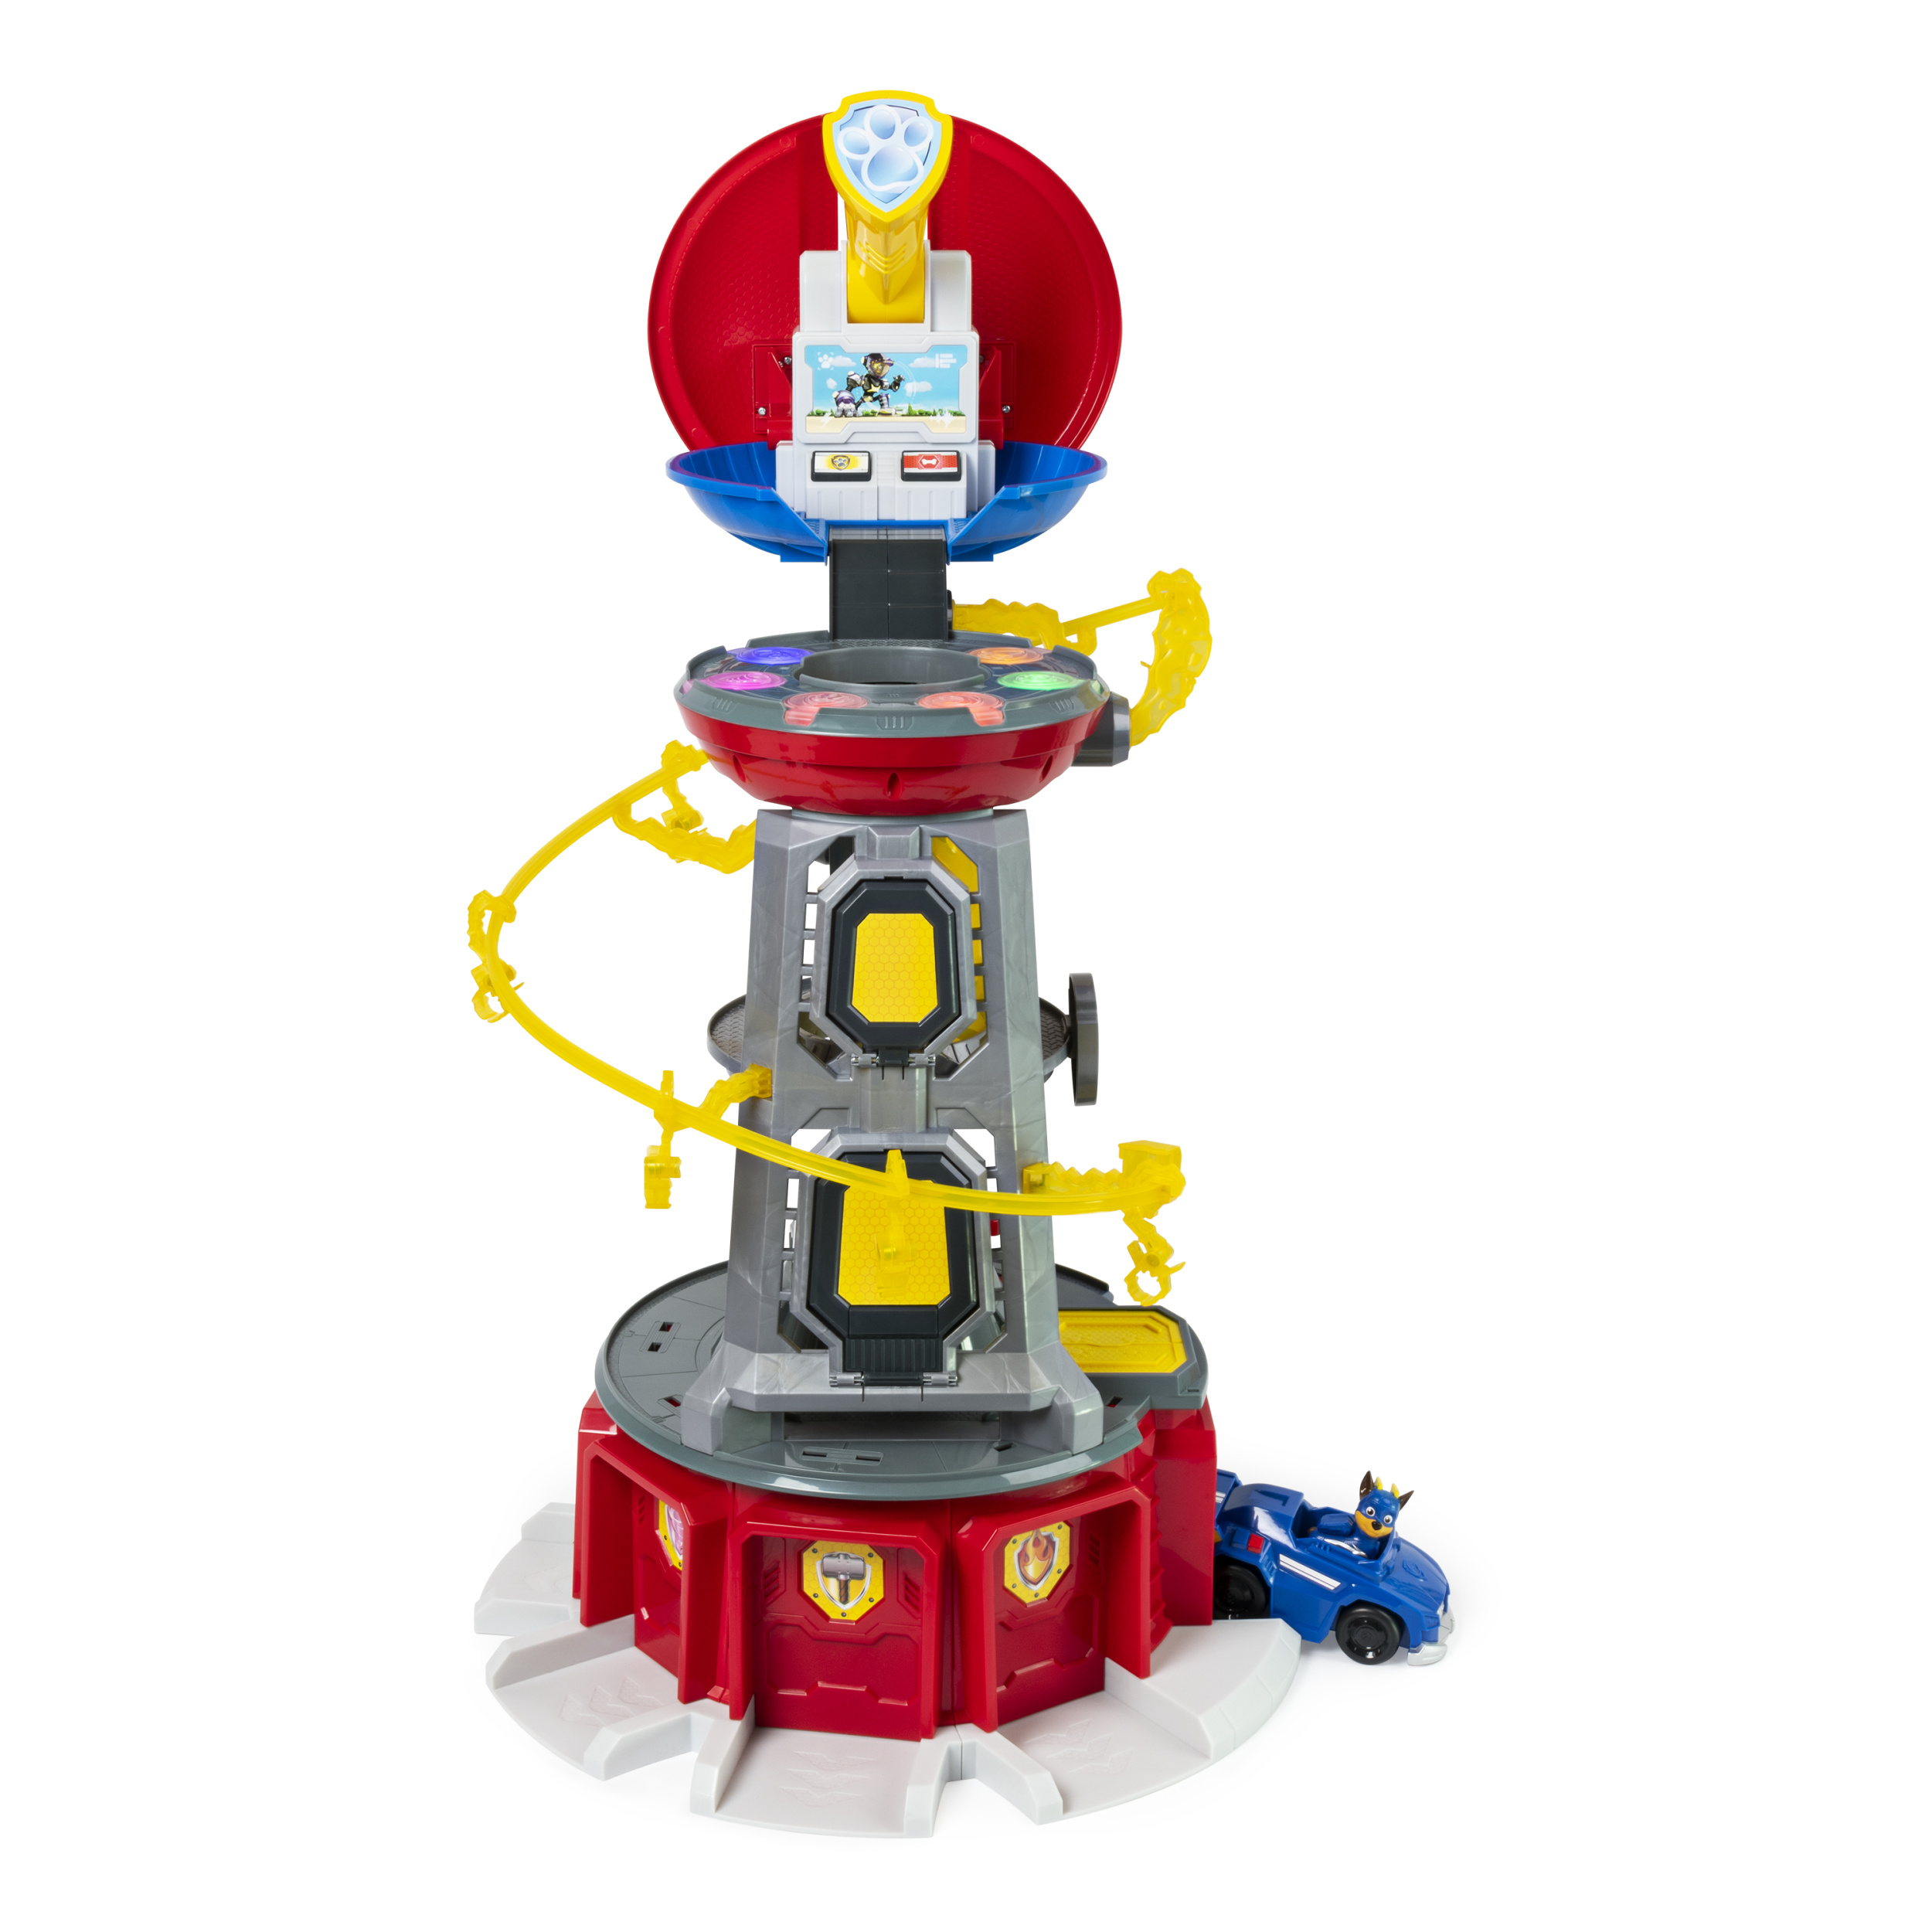 PAW Patrol, Mighty Pups Super PAWs Lookout Tower Playset with Lights and Sounds, Toy for Ages 3 and Up - image 1 of 9